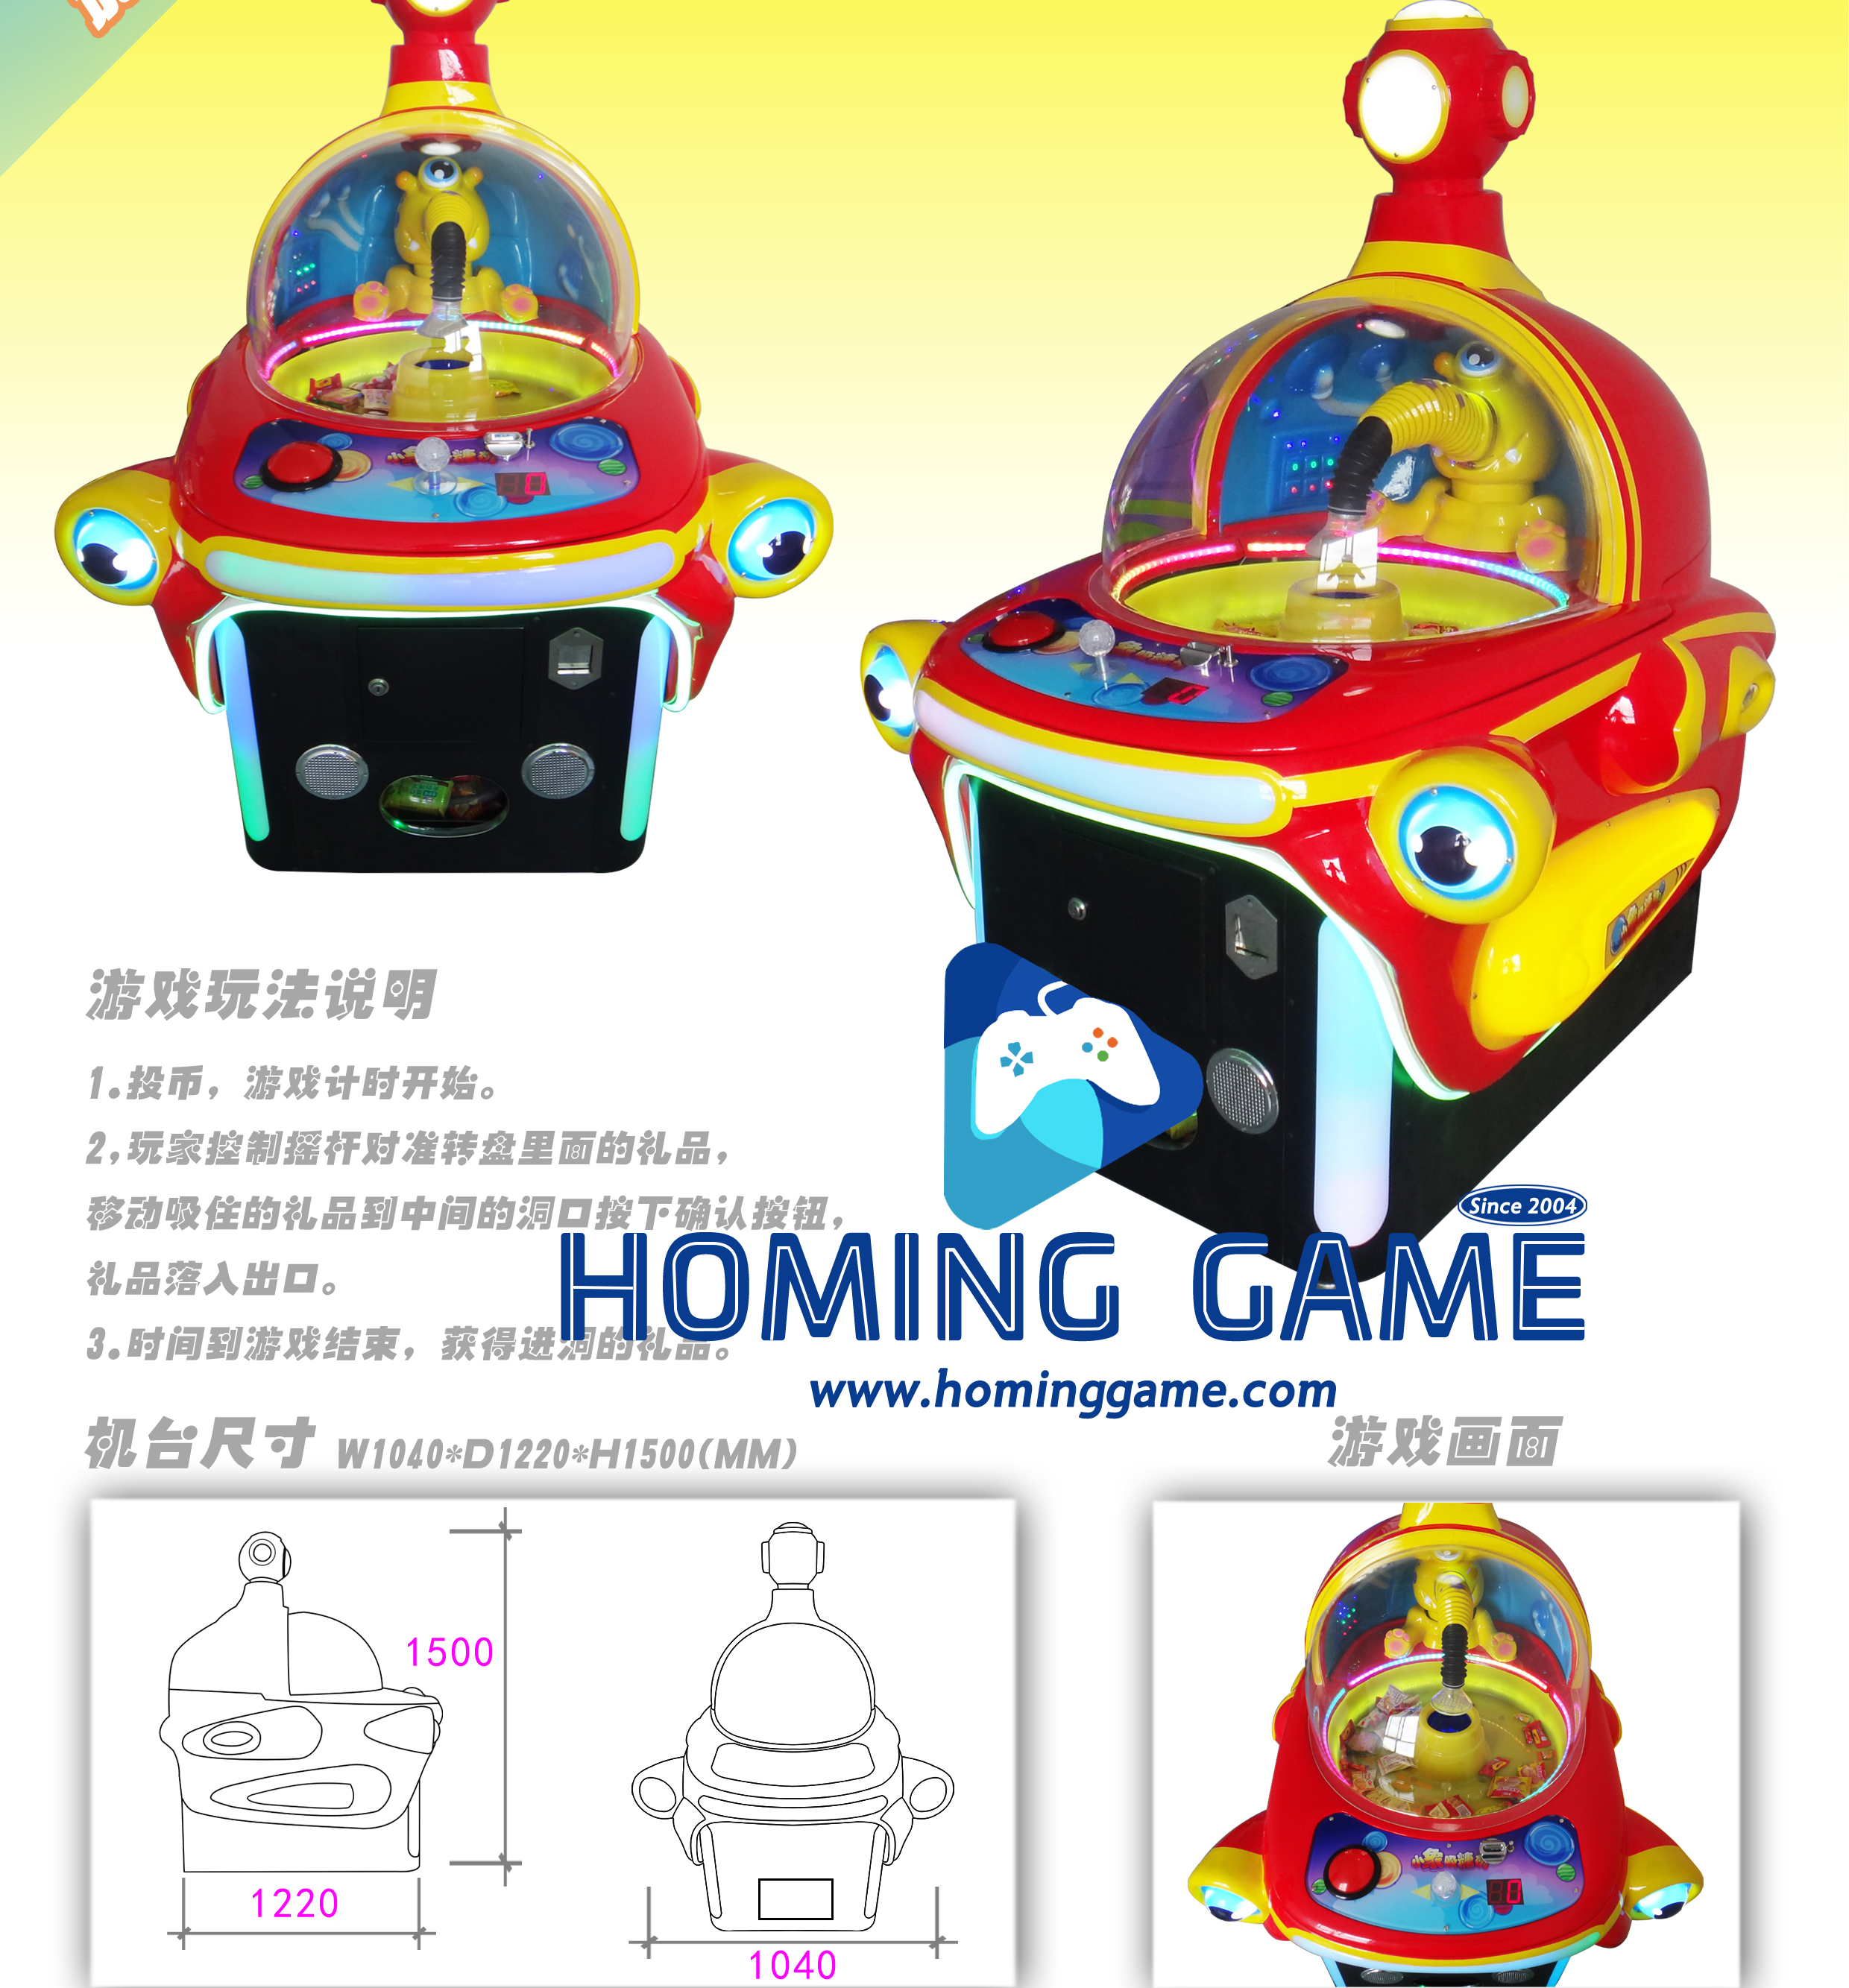 Factory  Direct Sale HomingGame Snork Suck Candy Prize Redemption Arcade Game Machine#prizegame #prizeredemptiongame #gamemachine #redemptiongamemachine #arcadegame (Order call whatsapp:+8618688409495)